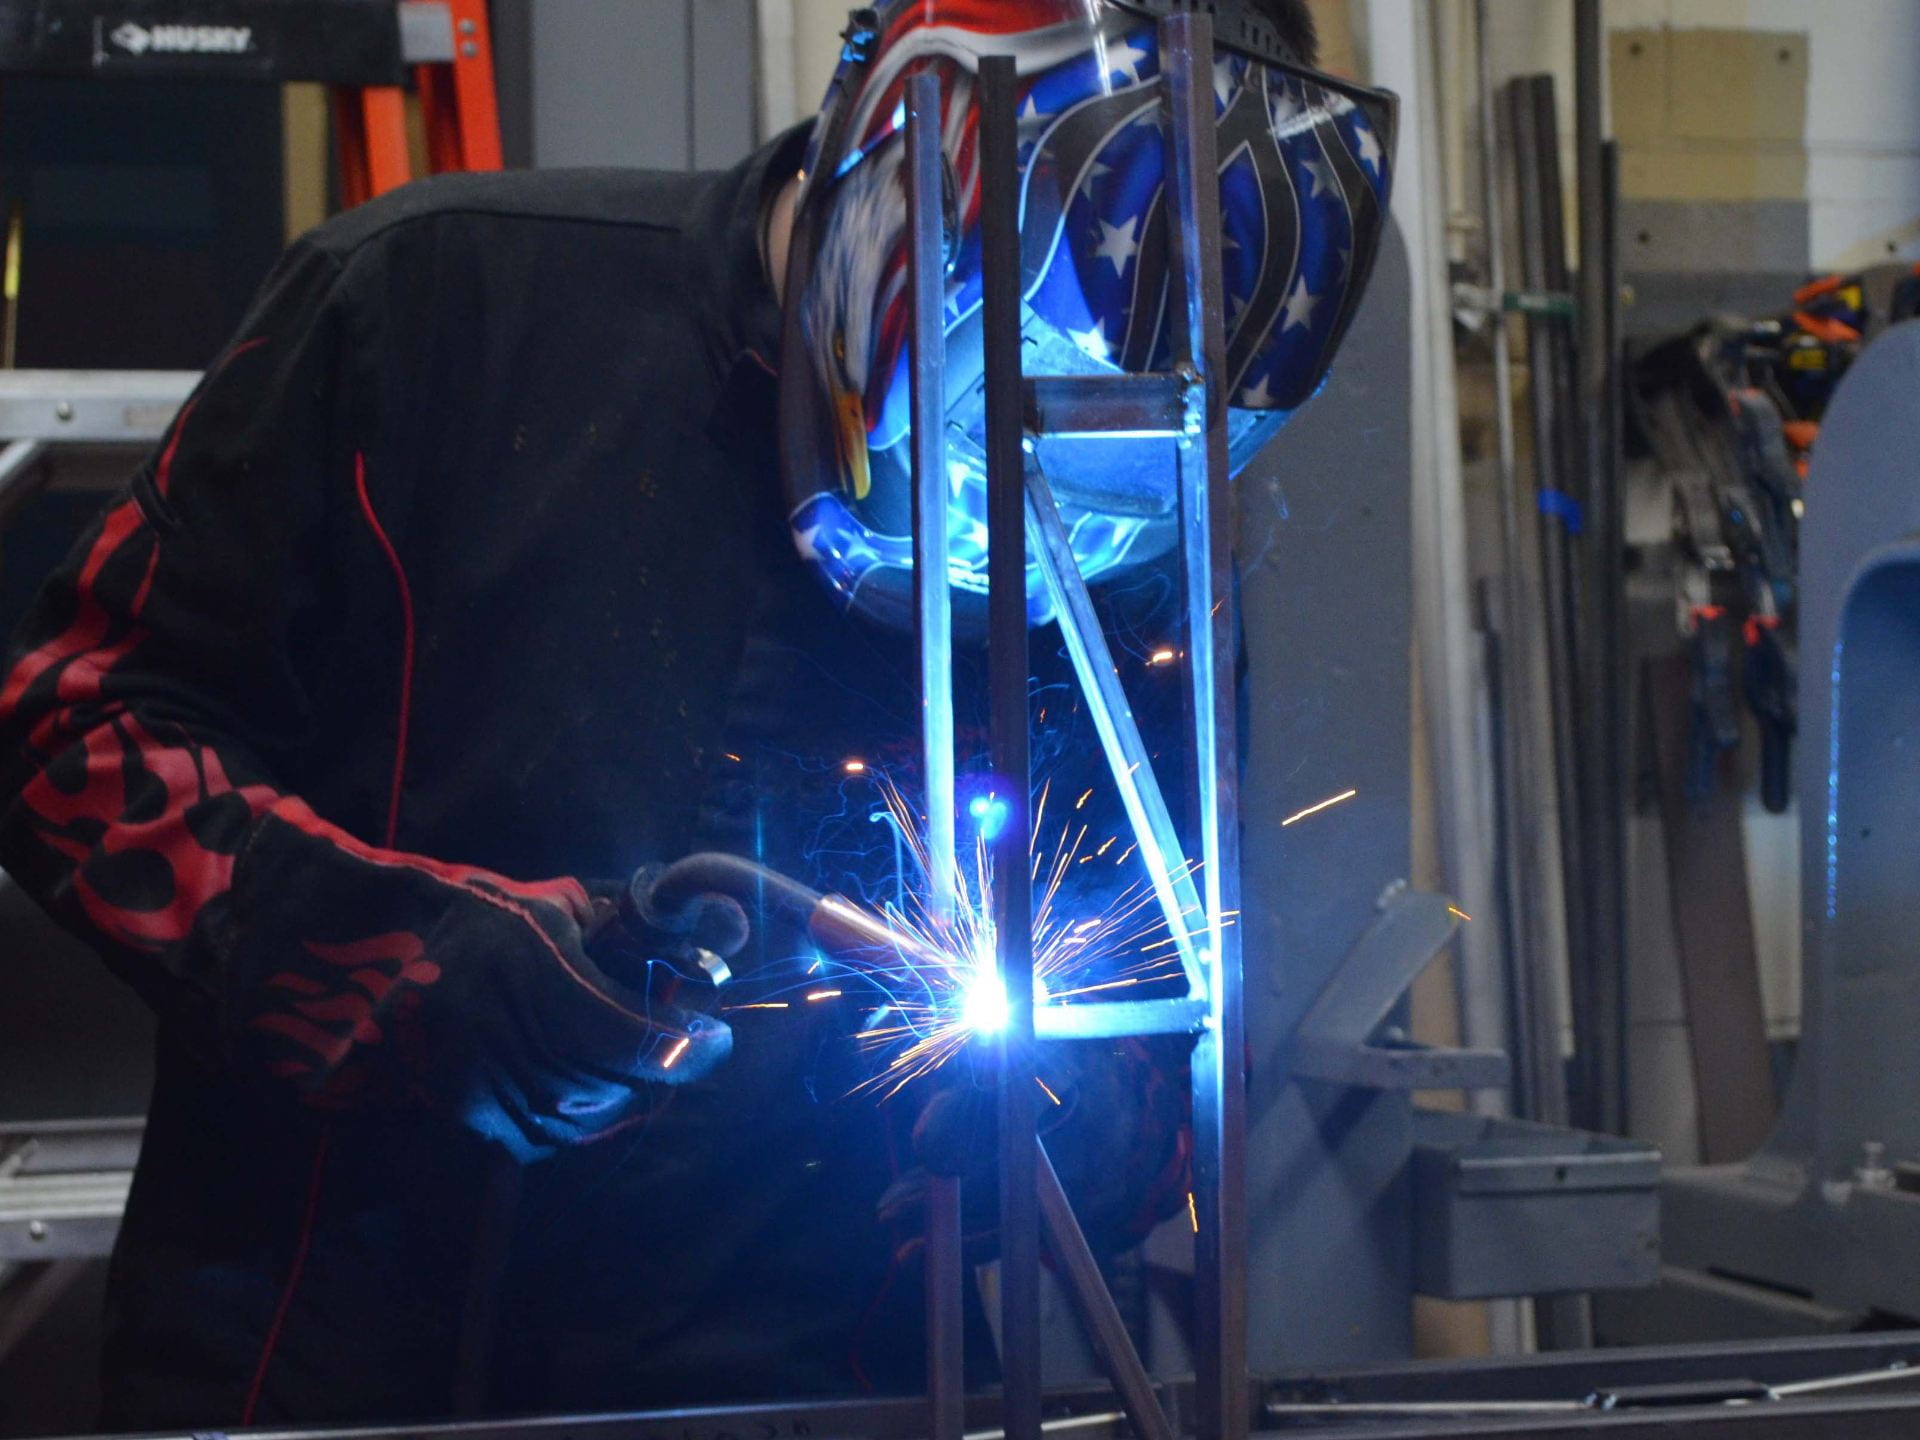 A photograph of a student welding